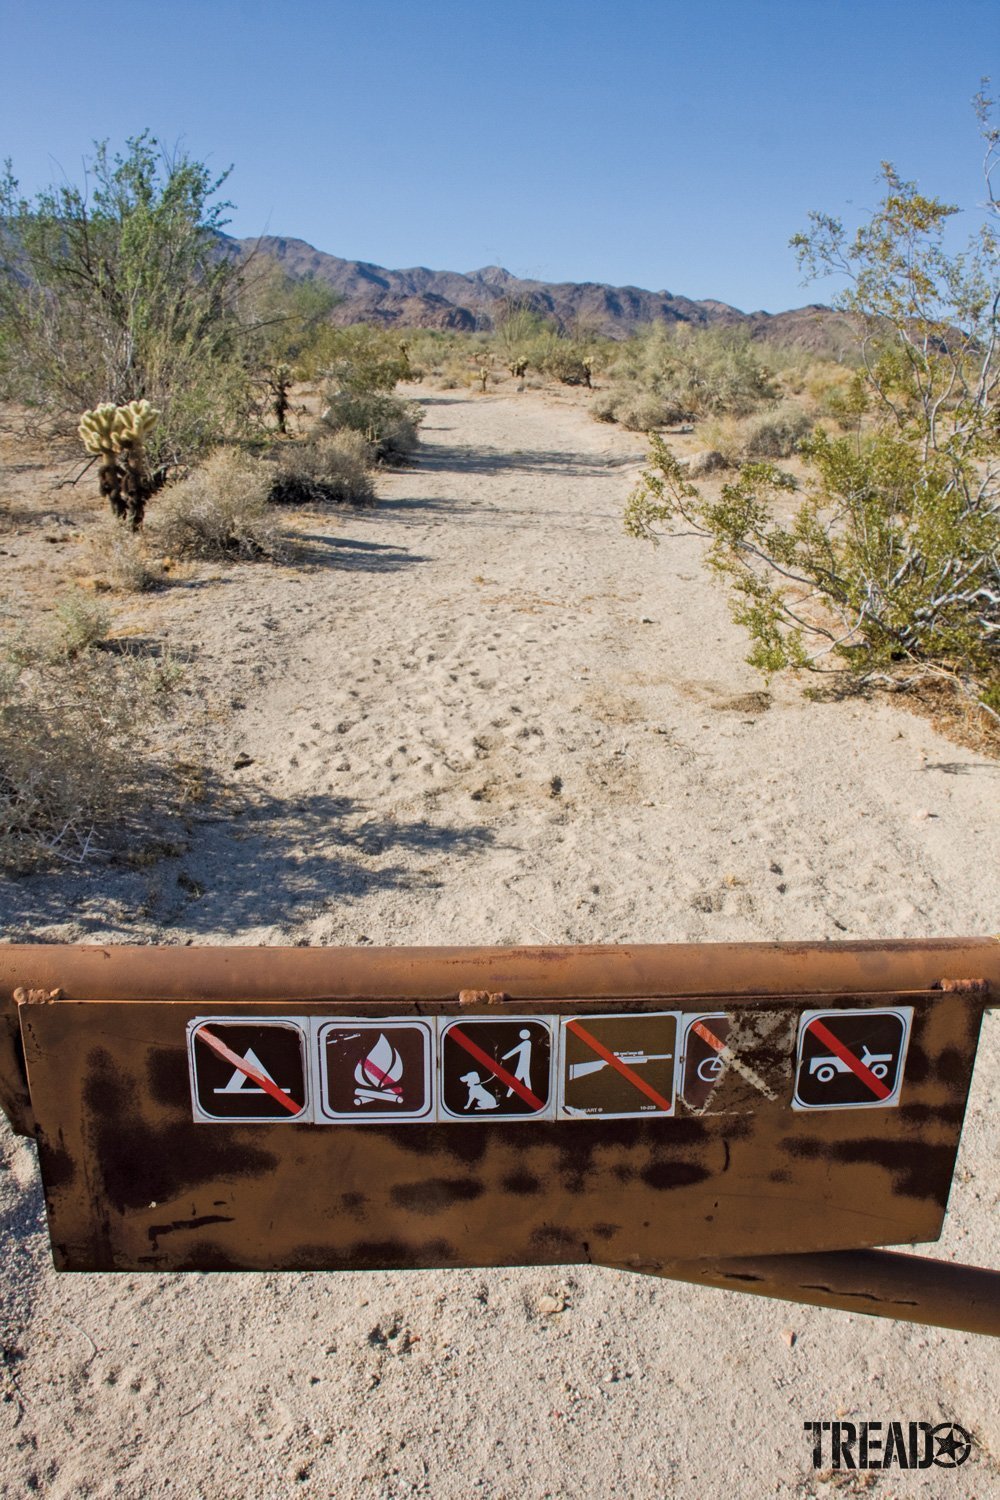 Desert dirt tail and rusted closed gate with no trespassing markers showing no entrance